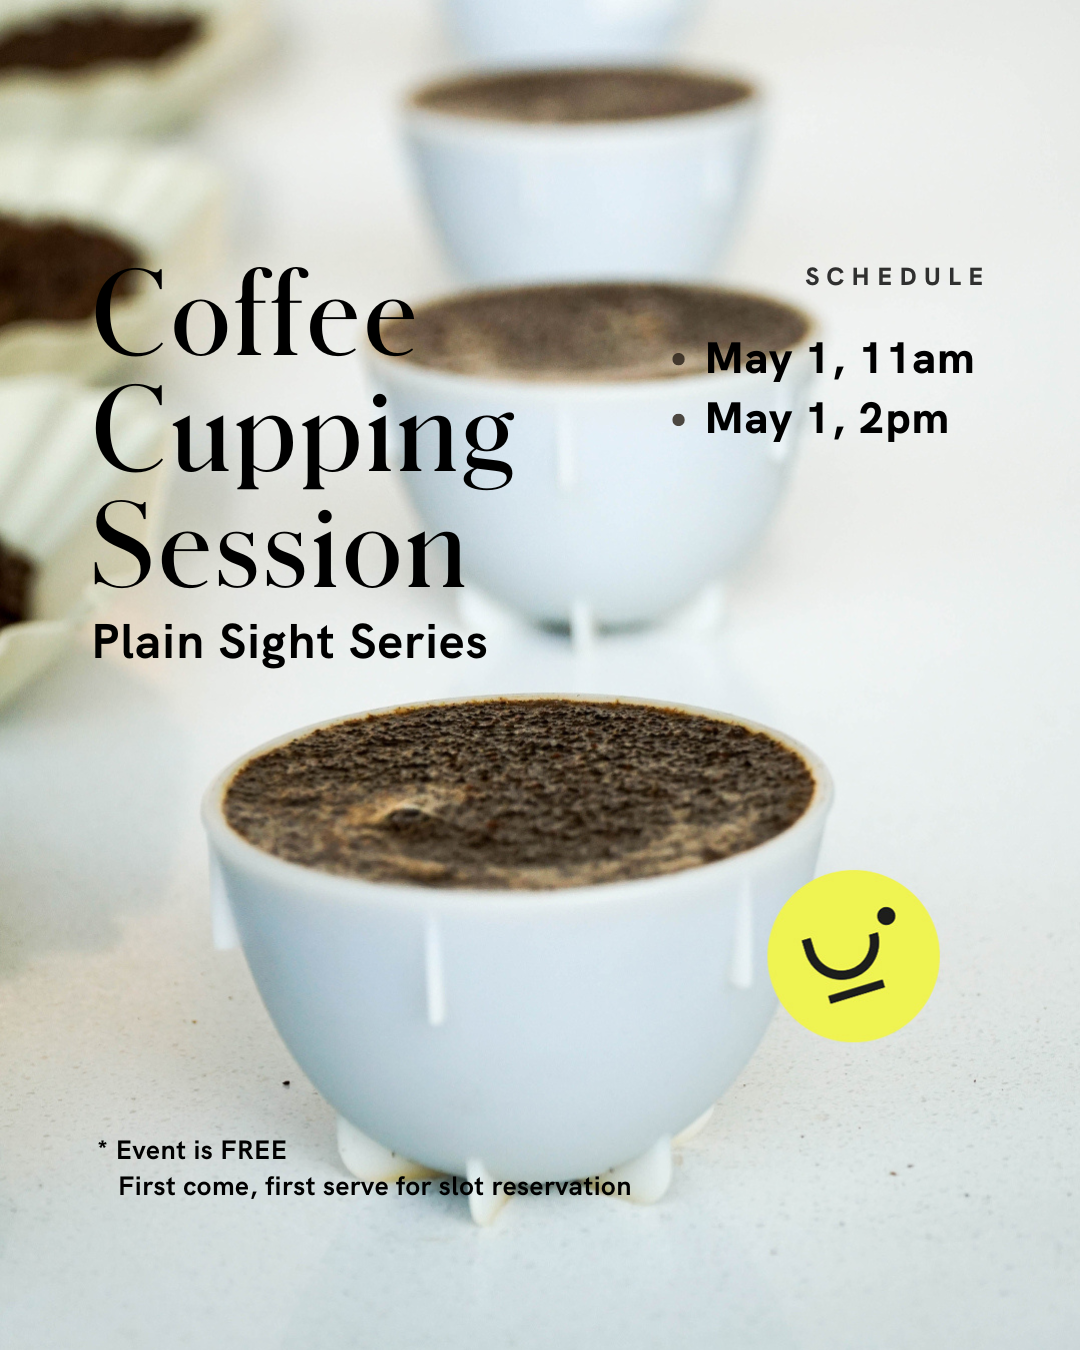 Coffee Cupping Session: Plain Sight Series